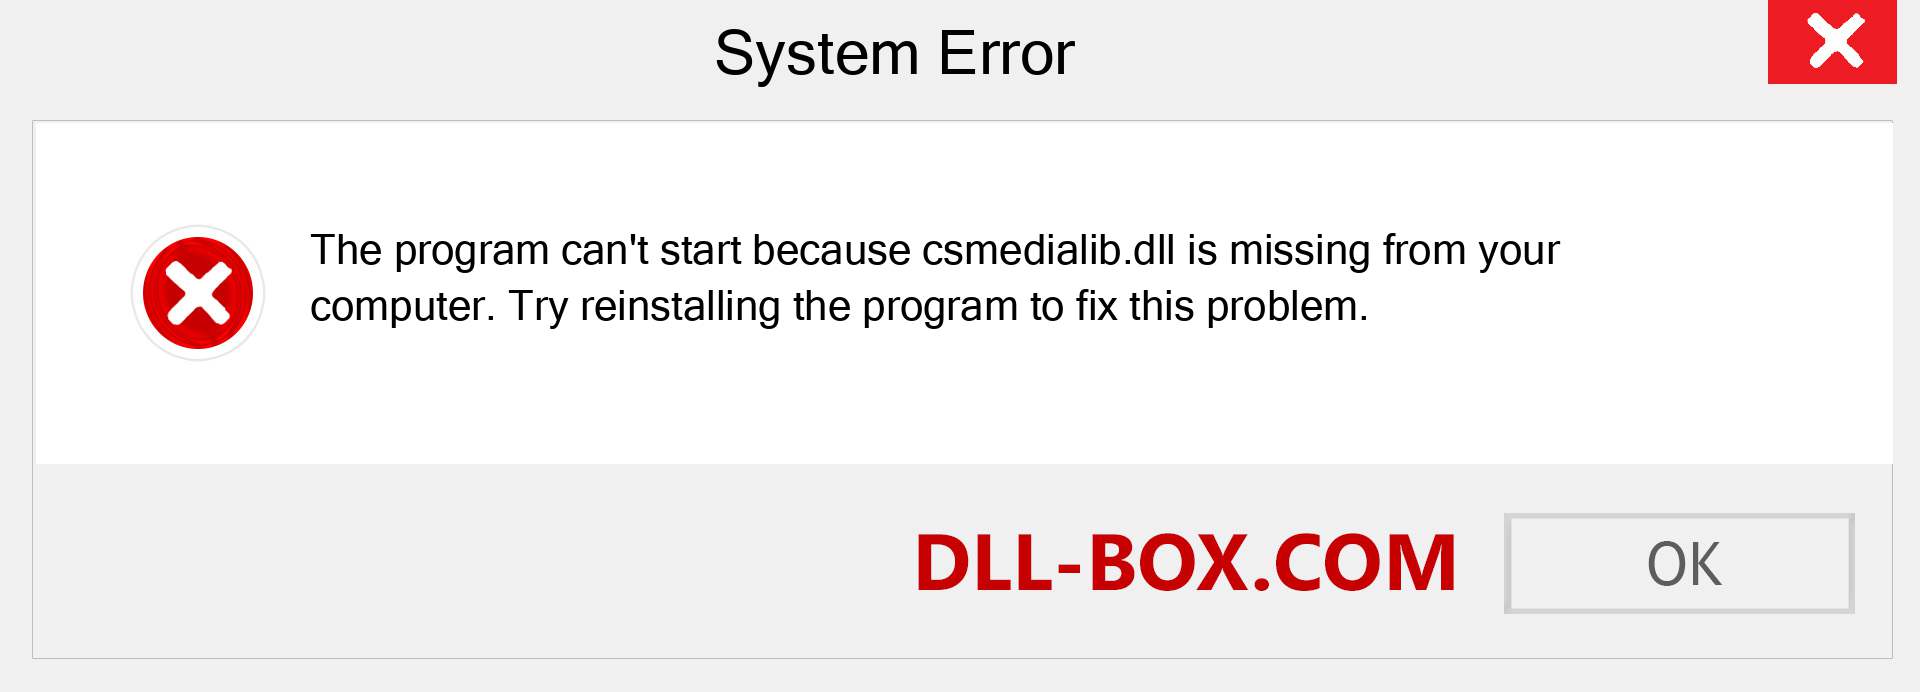  csmedialib.dll file is missing?. Download for Windows 7, 8, 10 - Fix  csmedialib dll Missing Error on Windows, photos, images